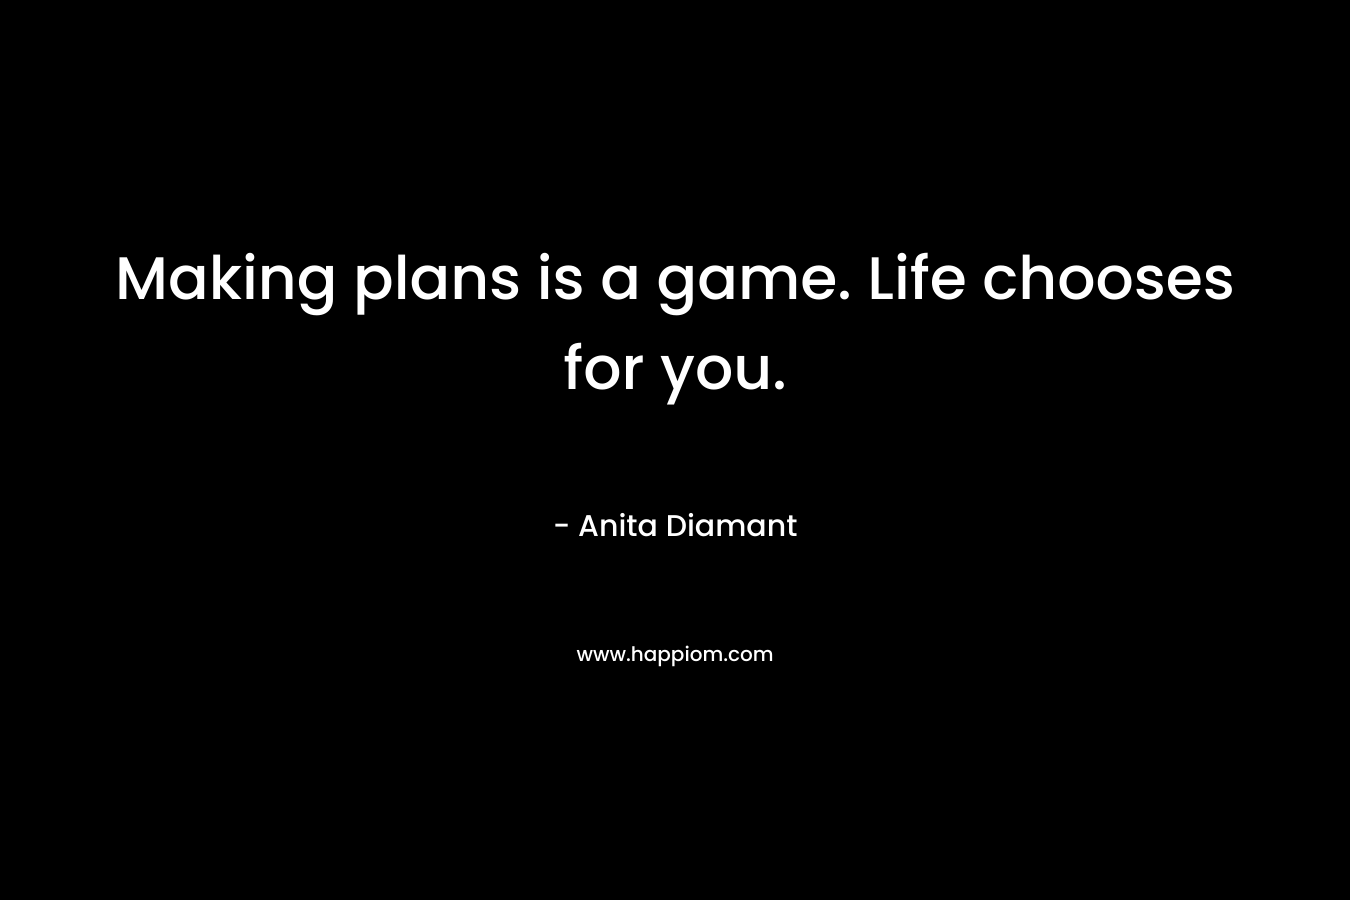 Making plans is a game. Life chooses for you.